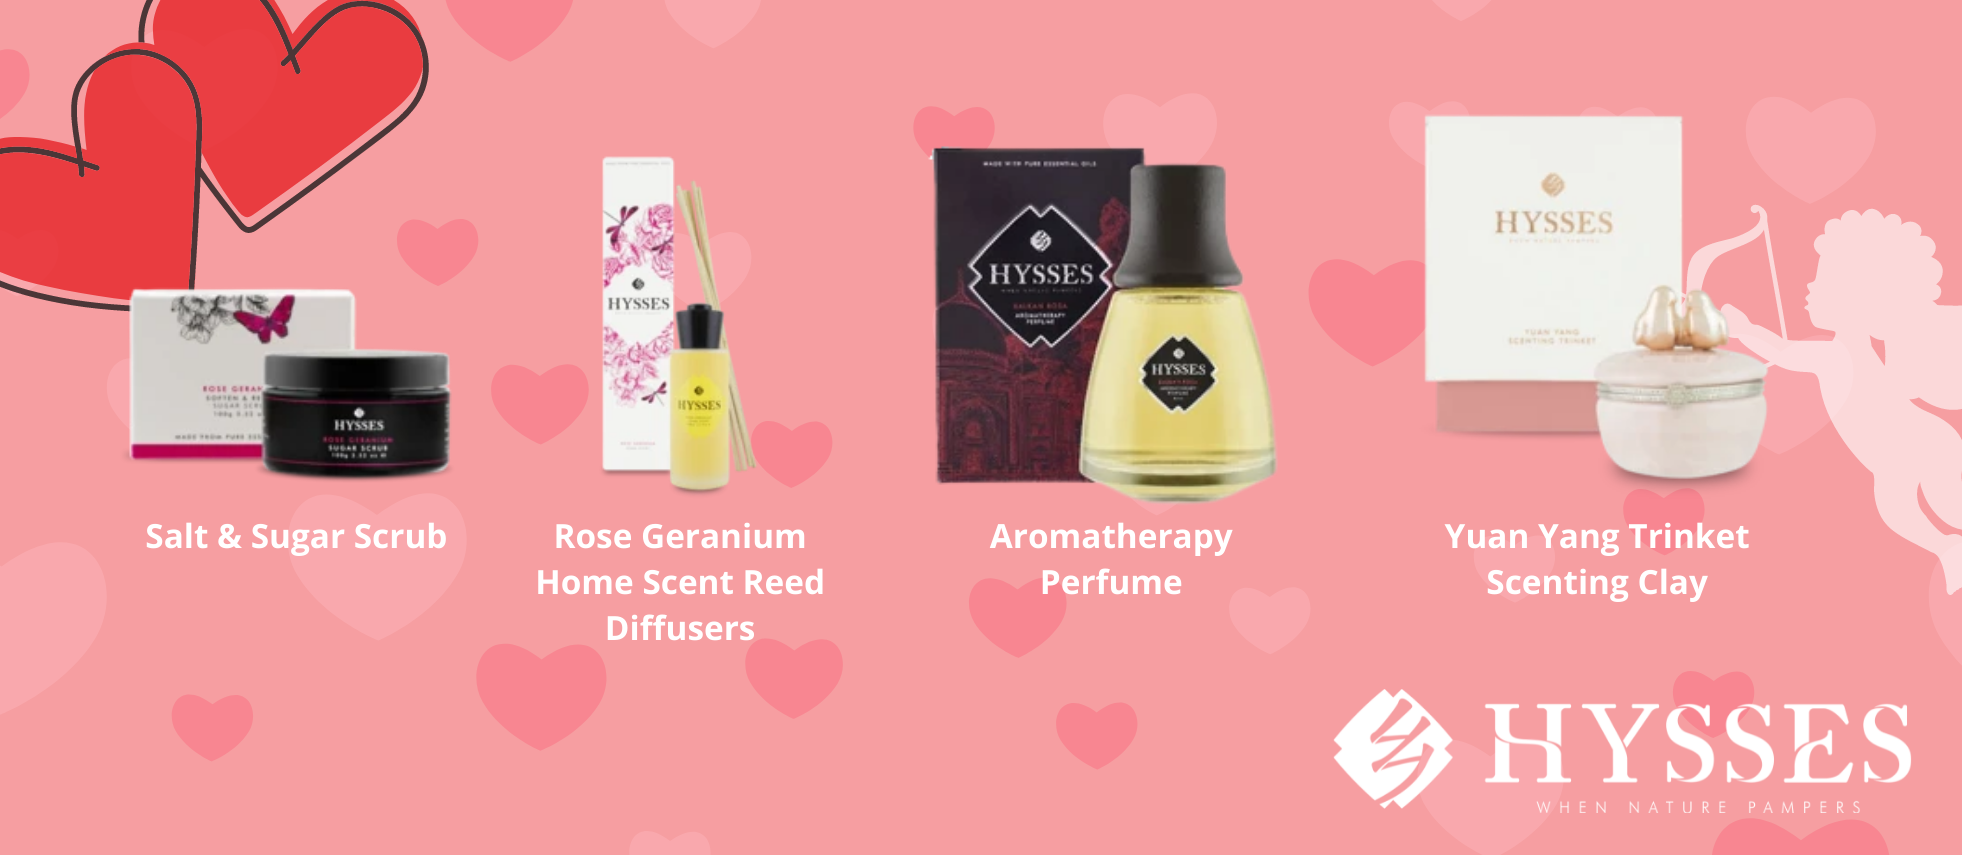 Press Release – HYSSES Celebrates Valentine’s Day With Month-long Promotions